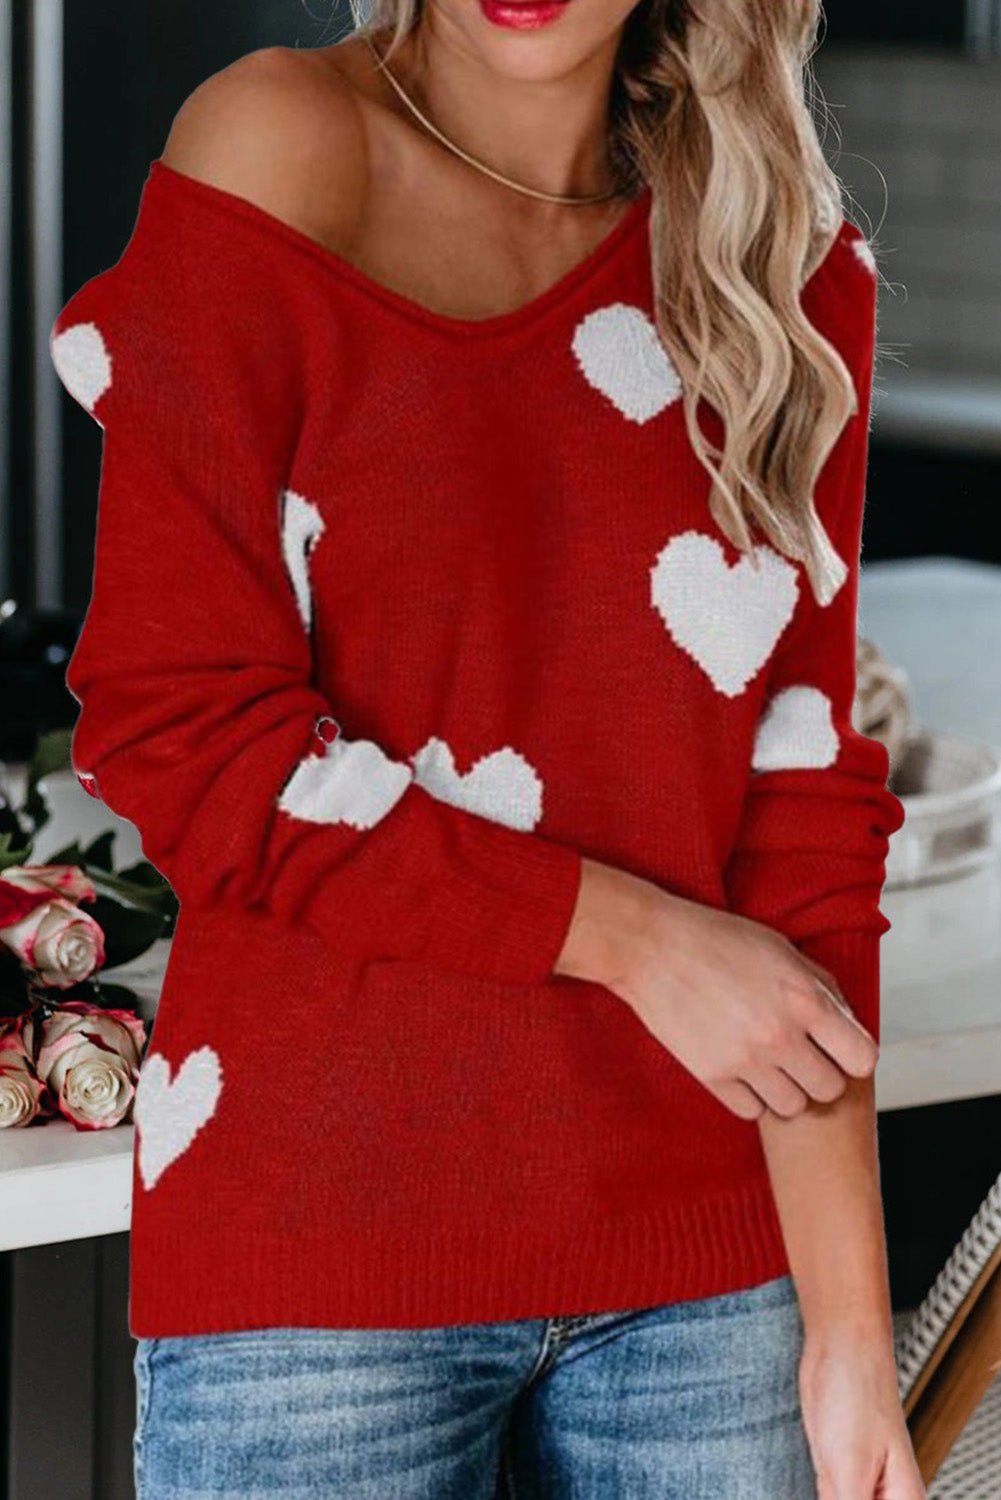 LC2722797-3-S, LC2722797-3-M, LC2722797-3-L, LC2722797-3-XL, Red Women Valentine Heart Sweater V Neck Knit Pullover Sweater